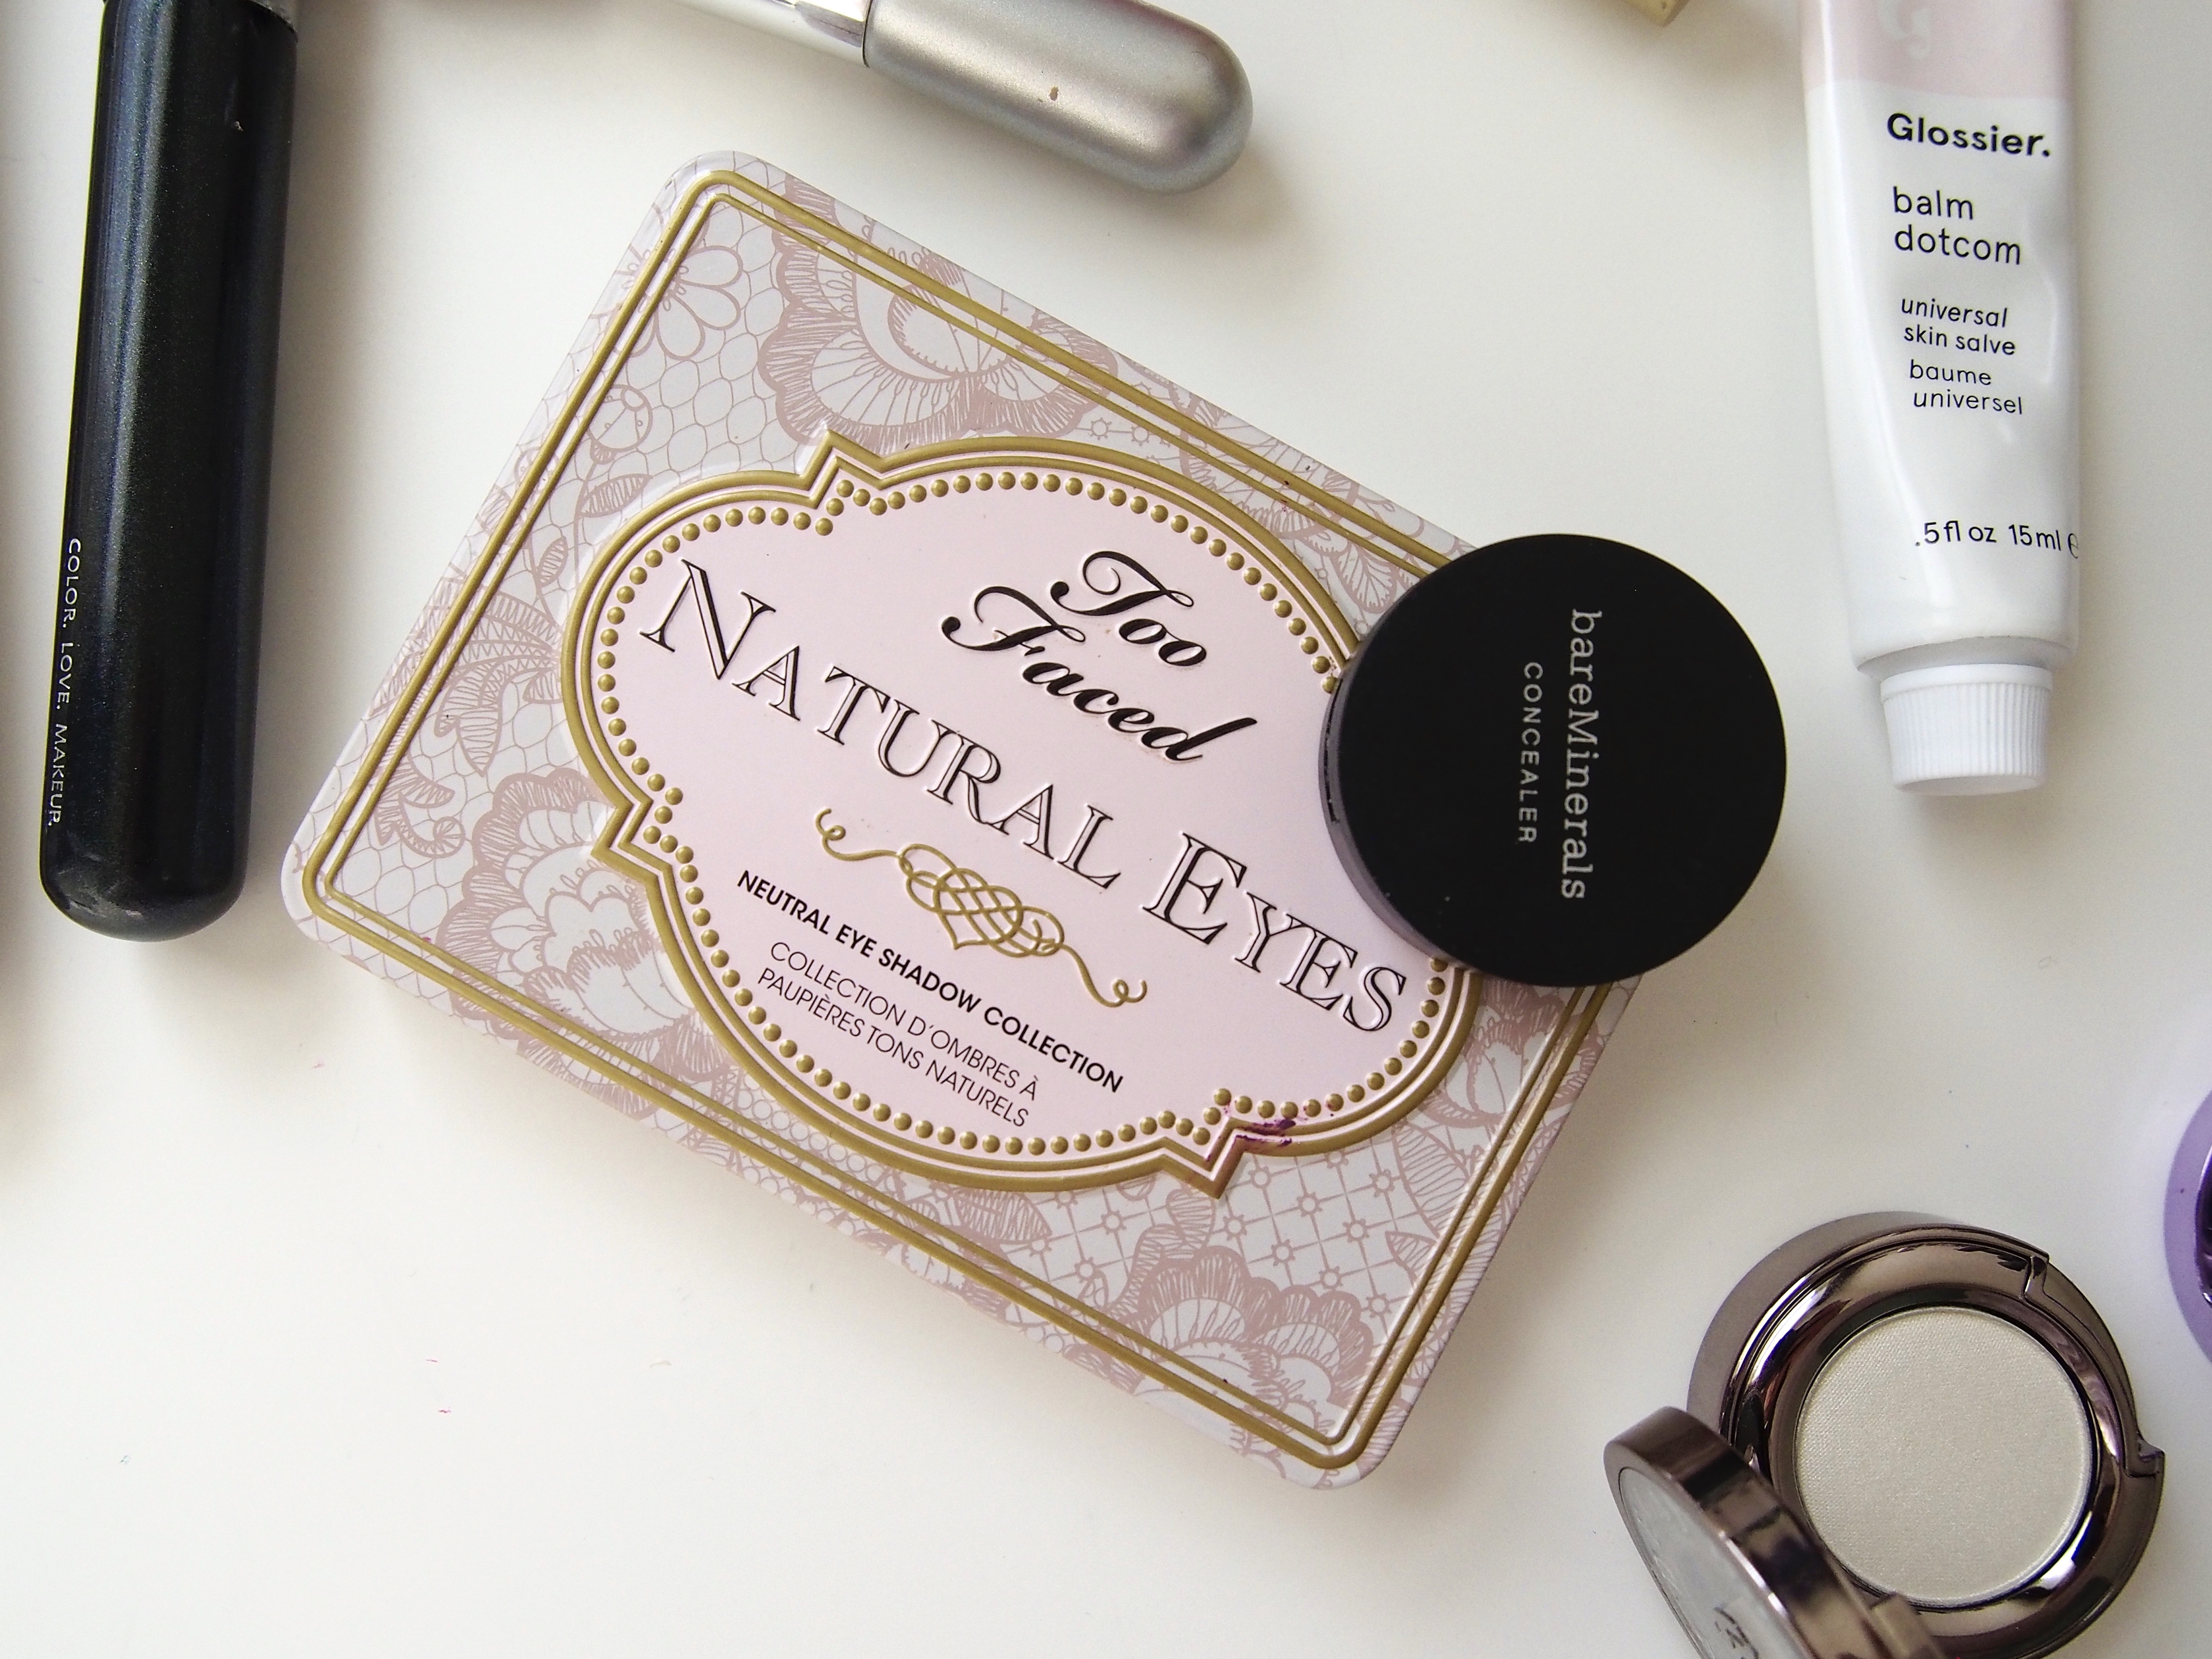 Cruelty Free Favorites - Too Faced Natural Eyes and BareMinerals Correcting Concealer